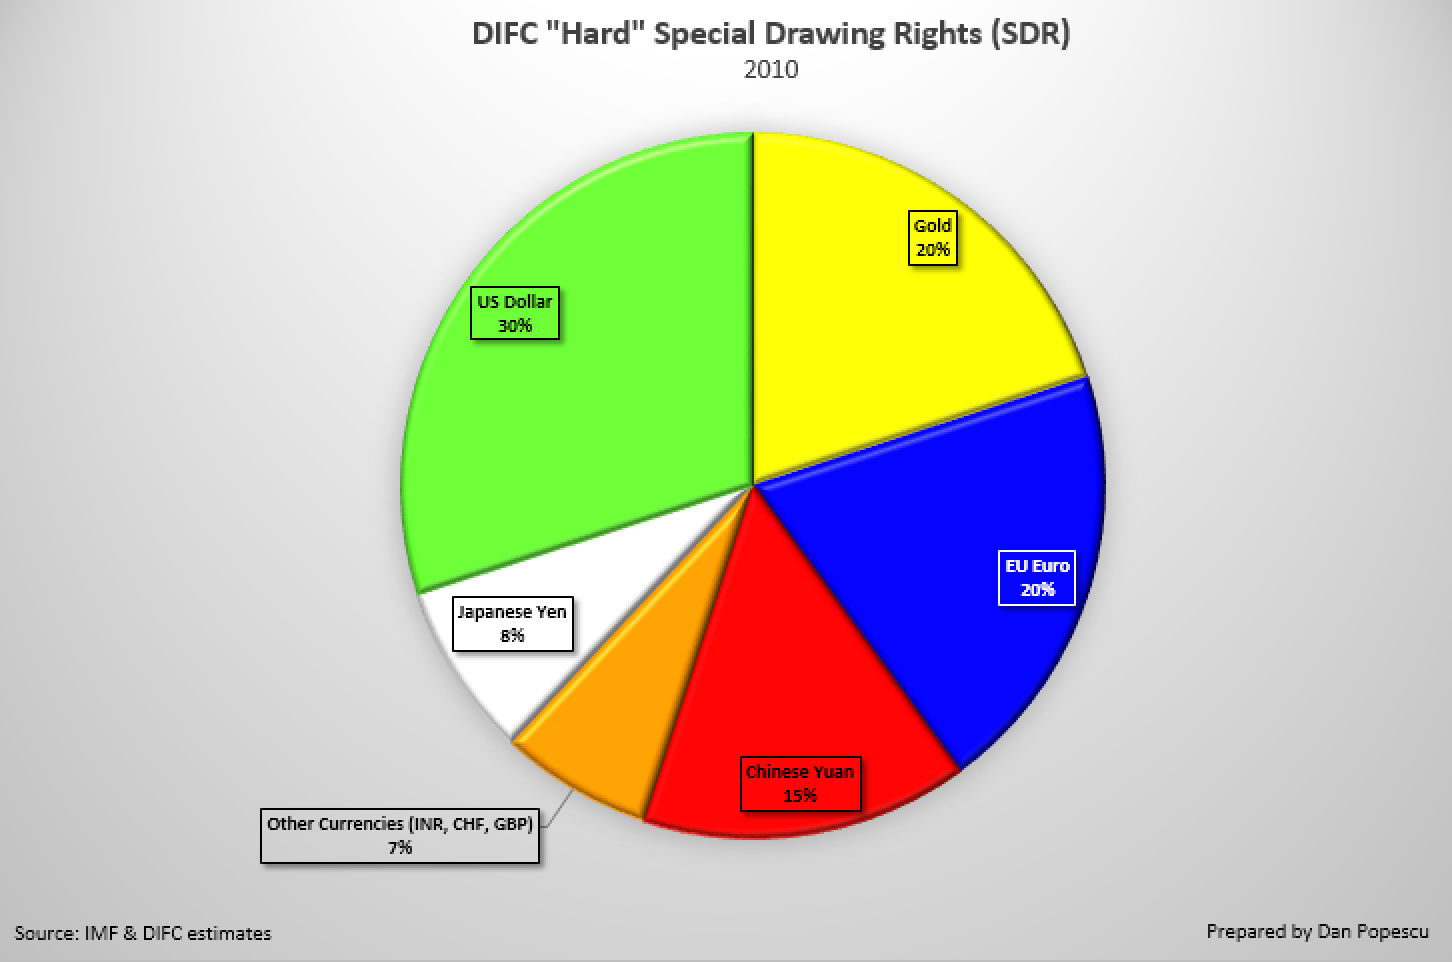  DIFC  Special Drawing Rights (SDR)